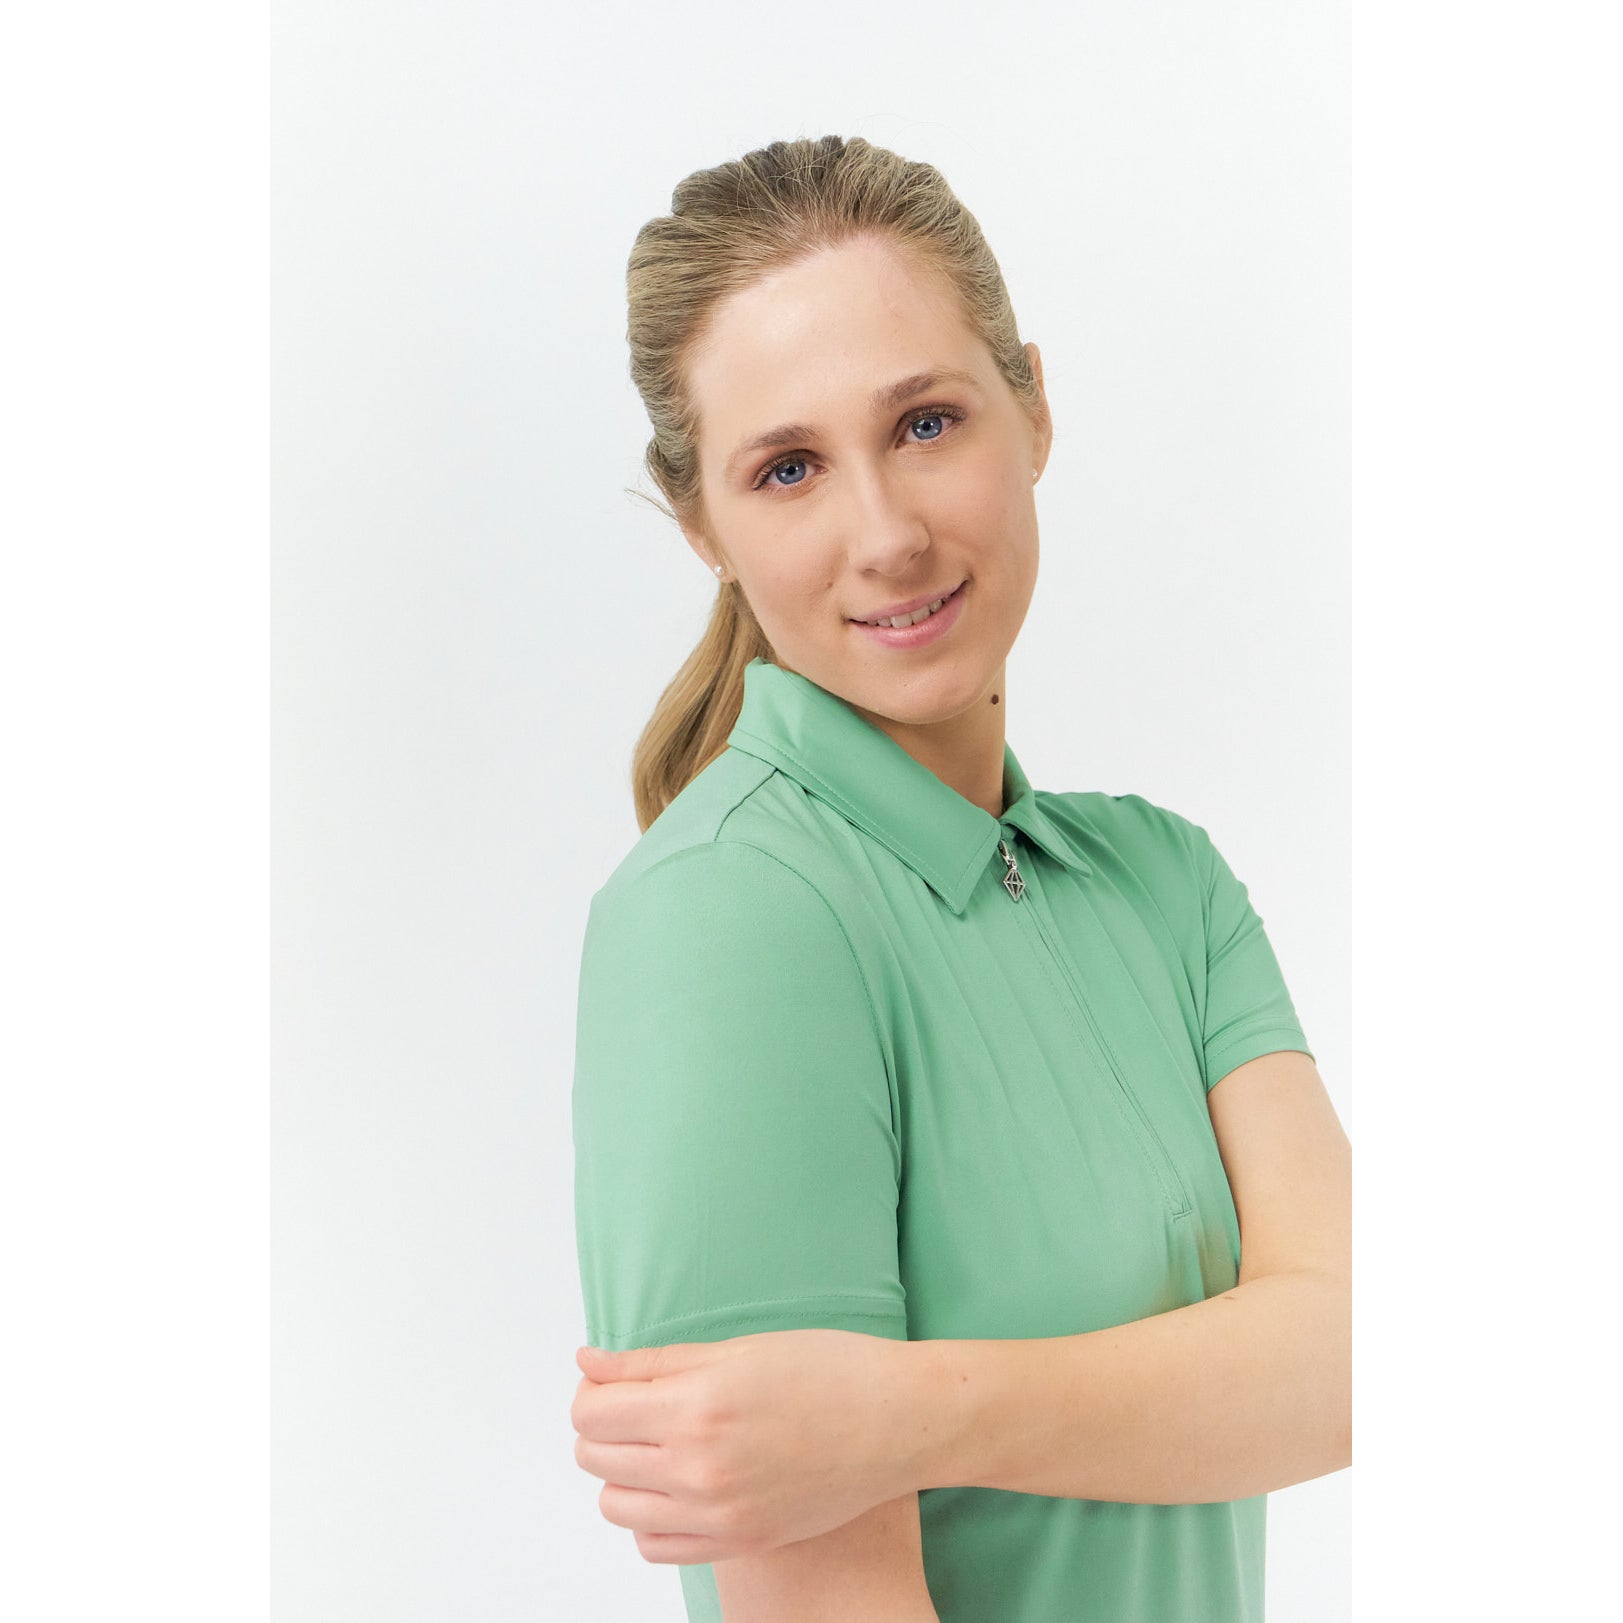 Pure Golf Ladies Cap Sleeve Polo in Sage Green